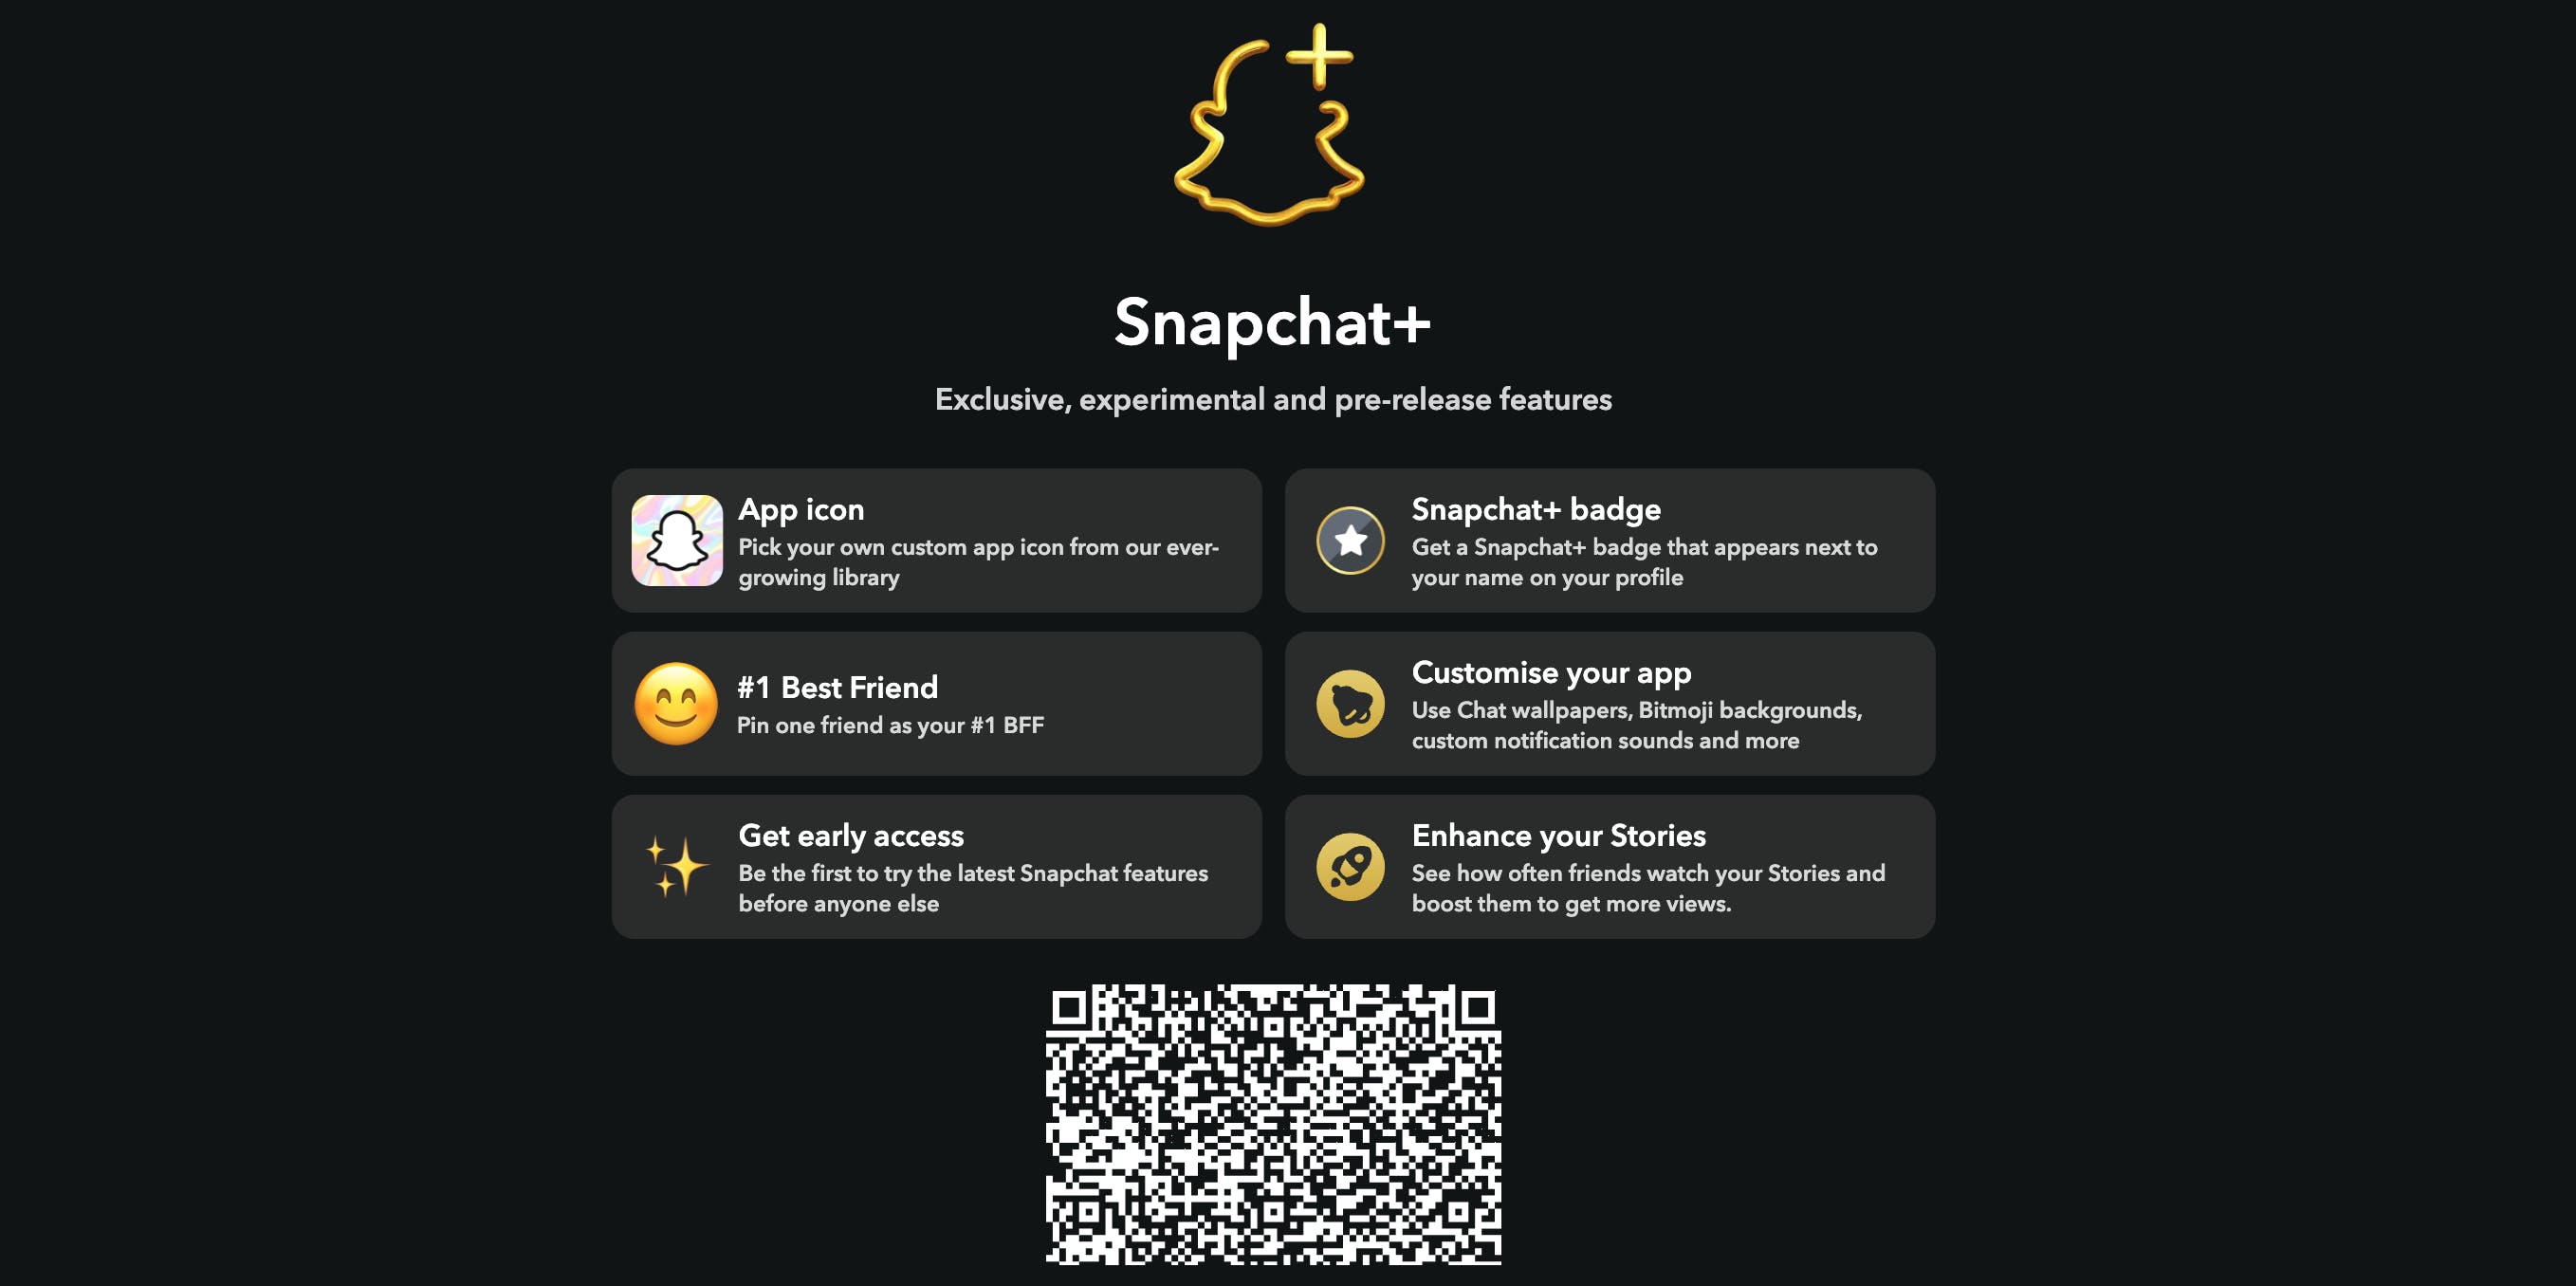 Snapchat+ is a paid subscription service that offers users access to features that enhance and personalize their Snapchat experience.